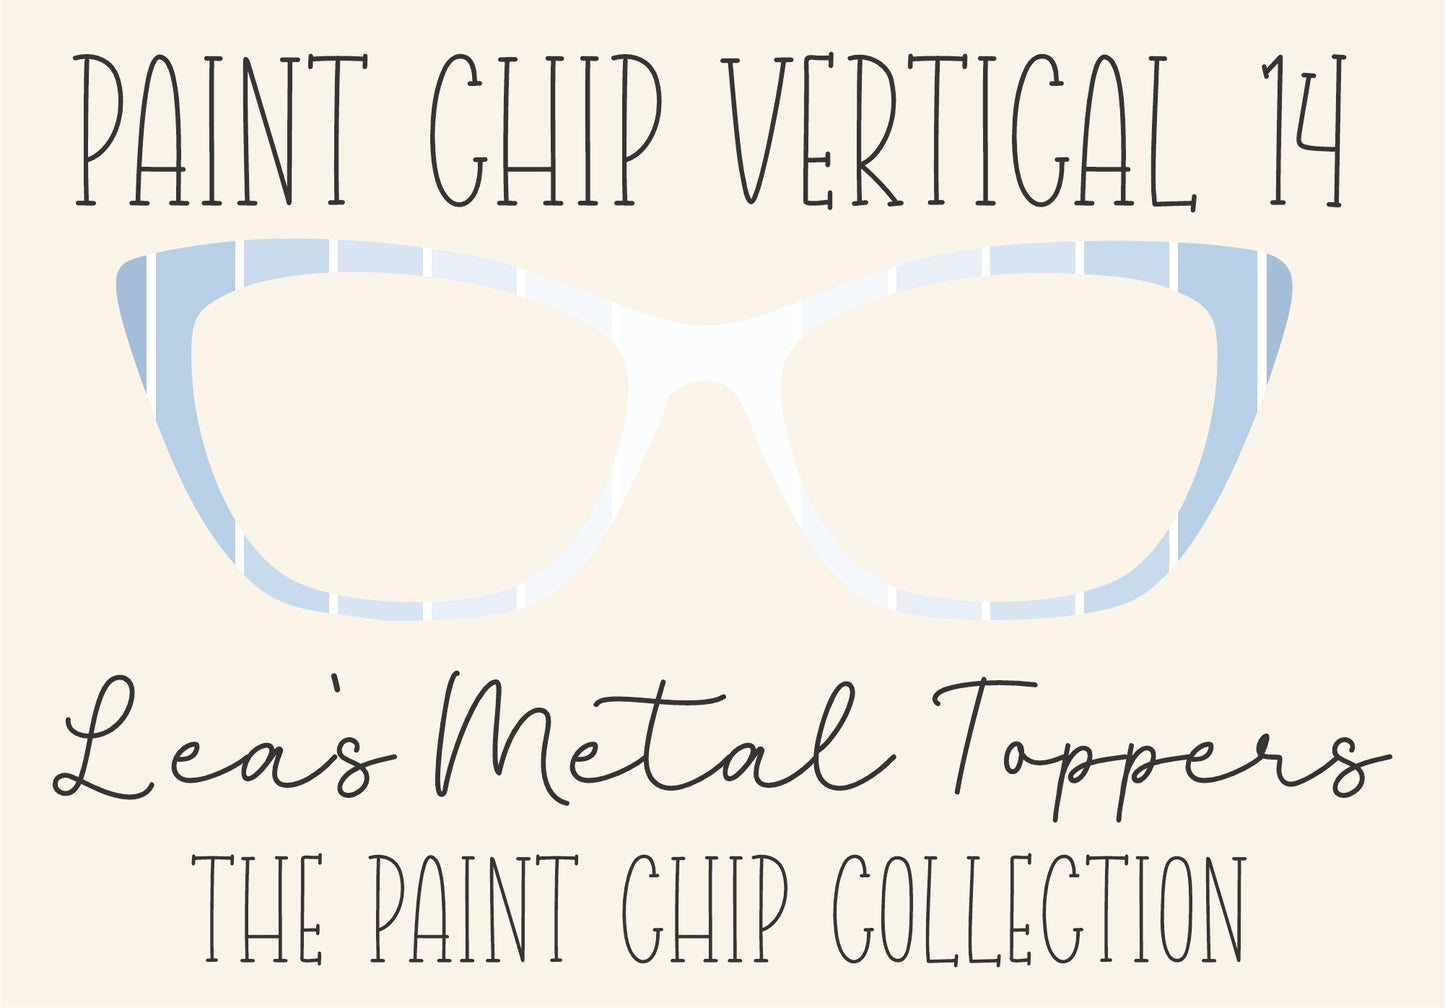 PAINT CHIP VERTICAL 14 Eyewear Frame Toppers COMES WITH MAGNETS